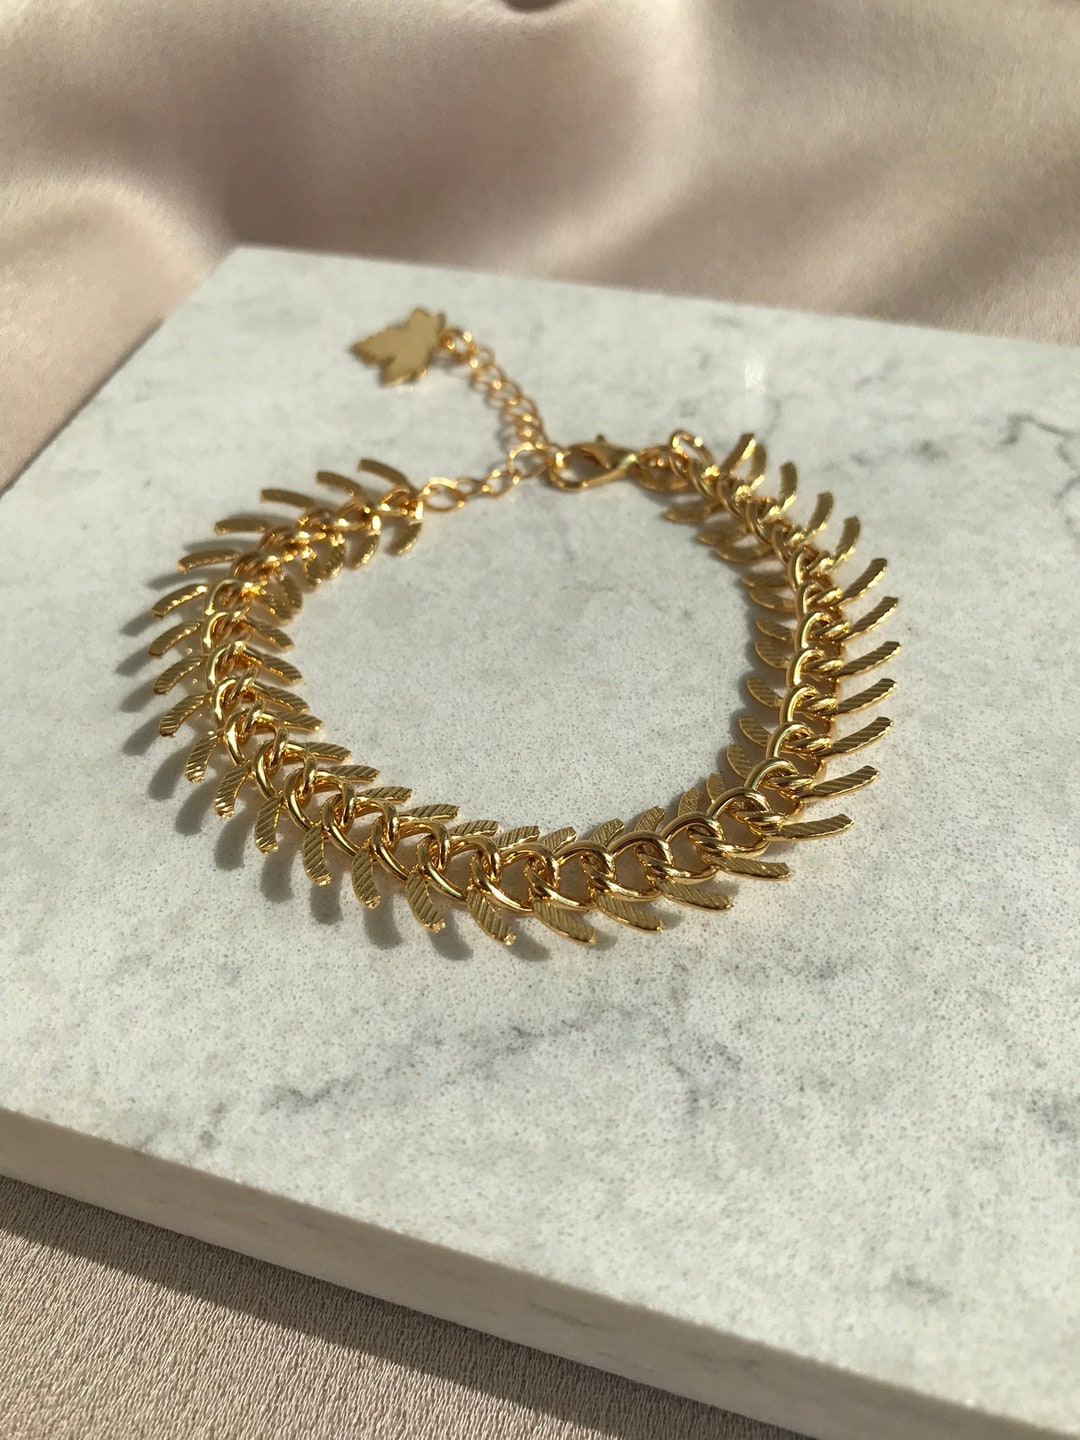 Buy Fishbone Chain Bracelet, Gold Chain Bracelet, Thick Gold Chain Bracelet,  Elegant Chain, Christmas Gift, Wedding Jewelry, Gift for Her Online in  India - Etsy